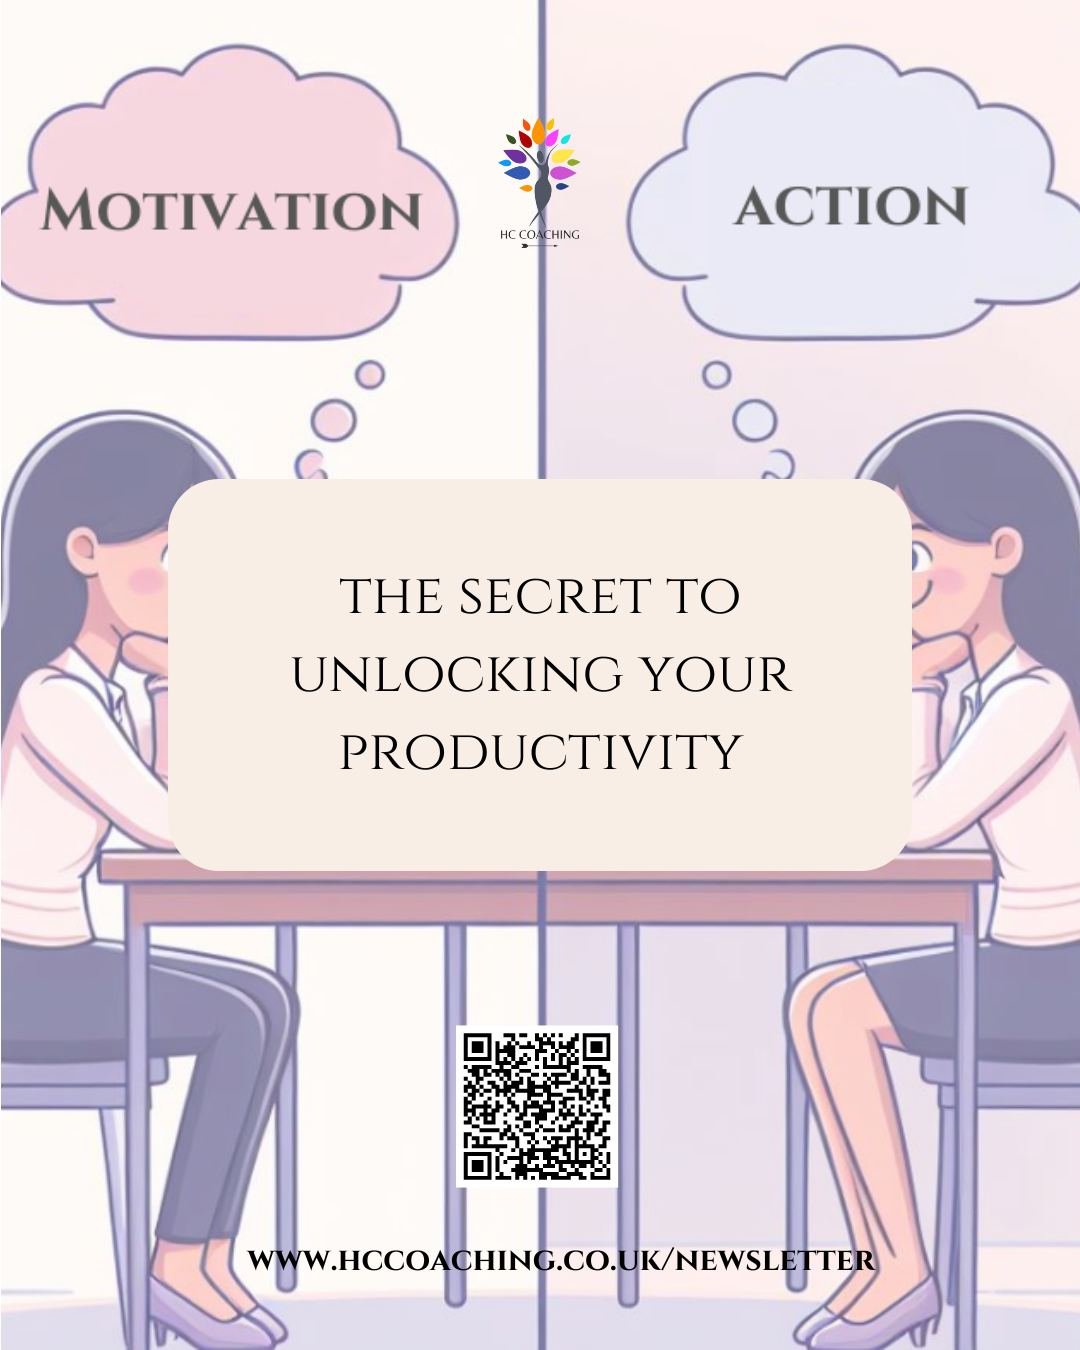 Motivation doesn't always stay around when we need it. In this week's blog I'm sharing the first step to unlocking your productivity - a way that will work specifically for you.

If you're not already on my newsletter list, you can access the blog di